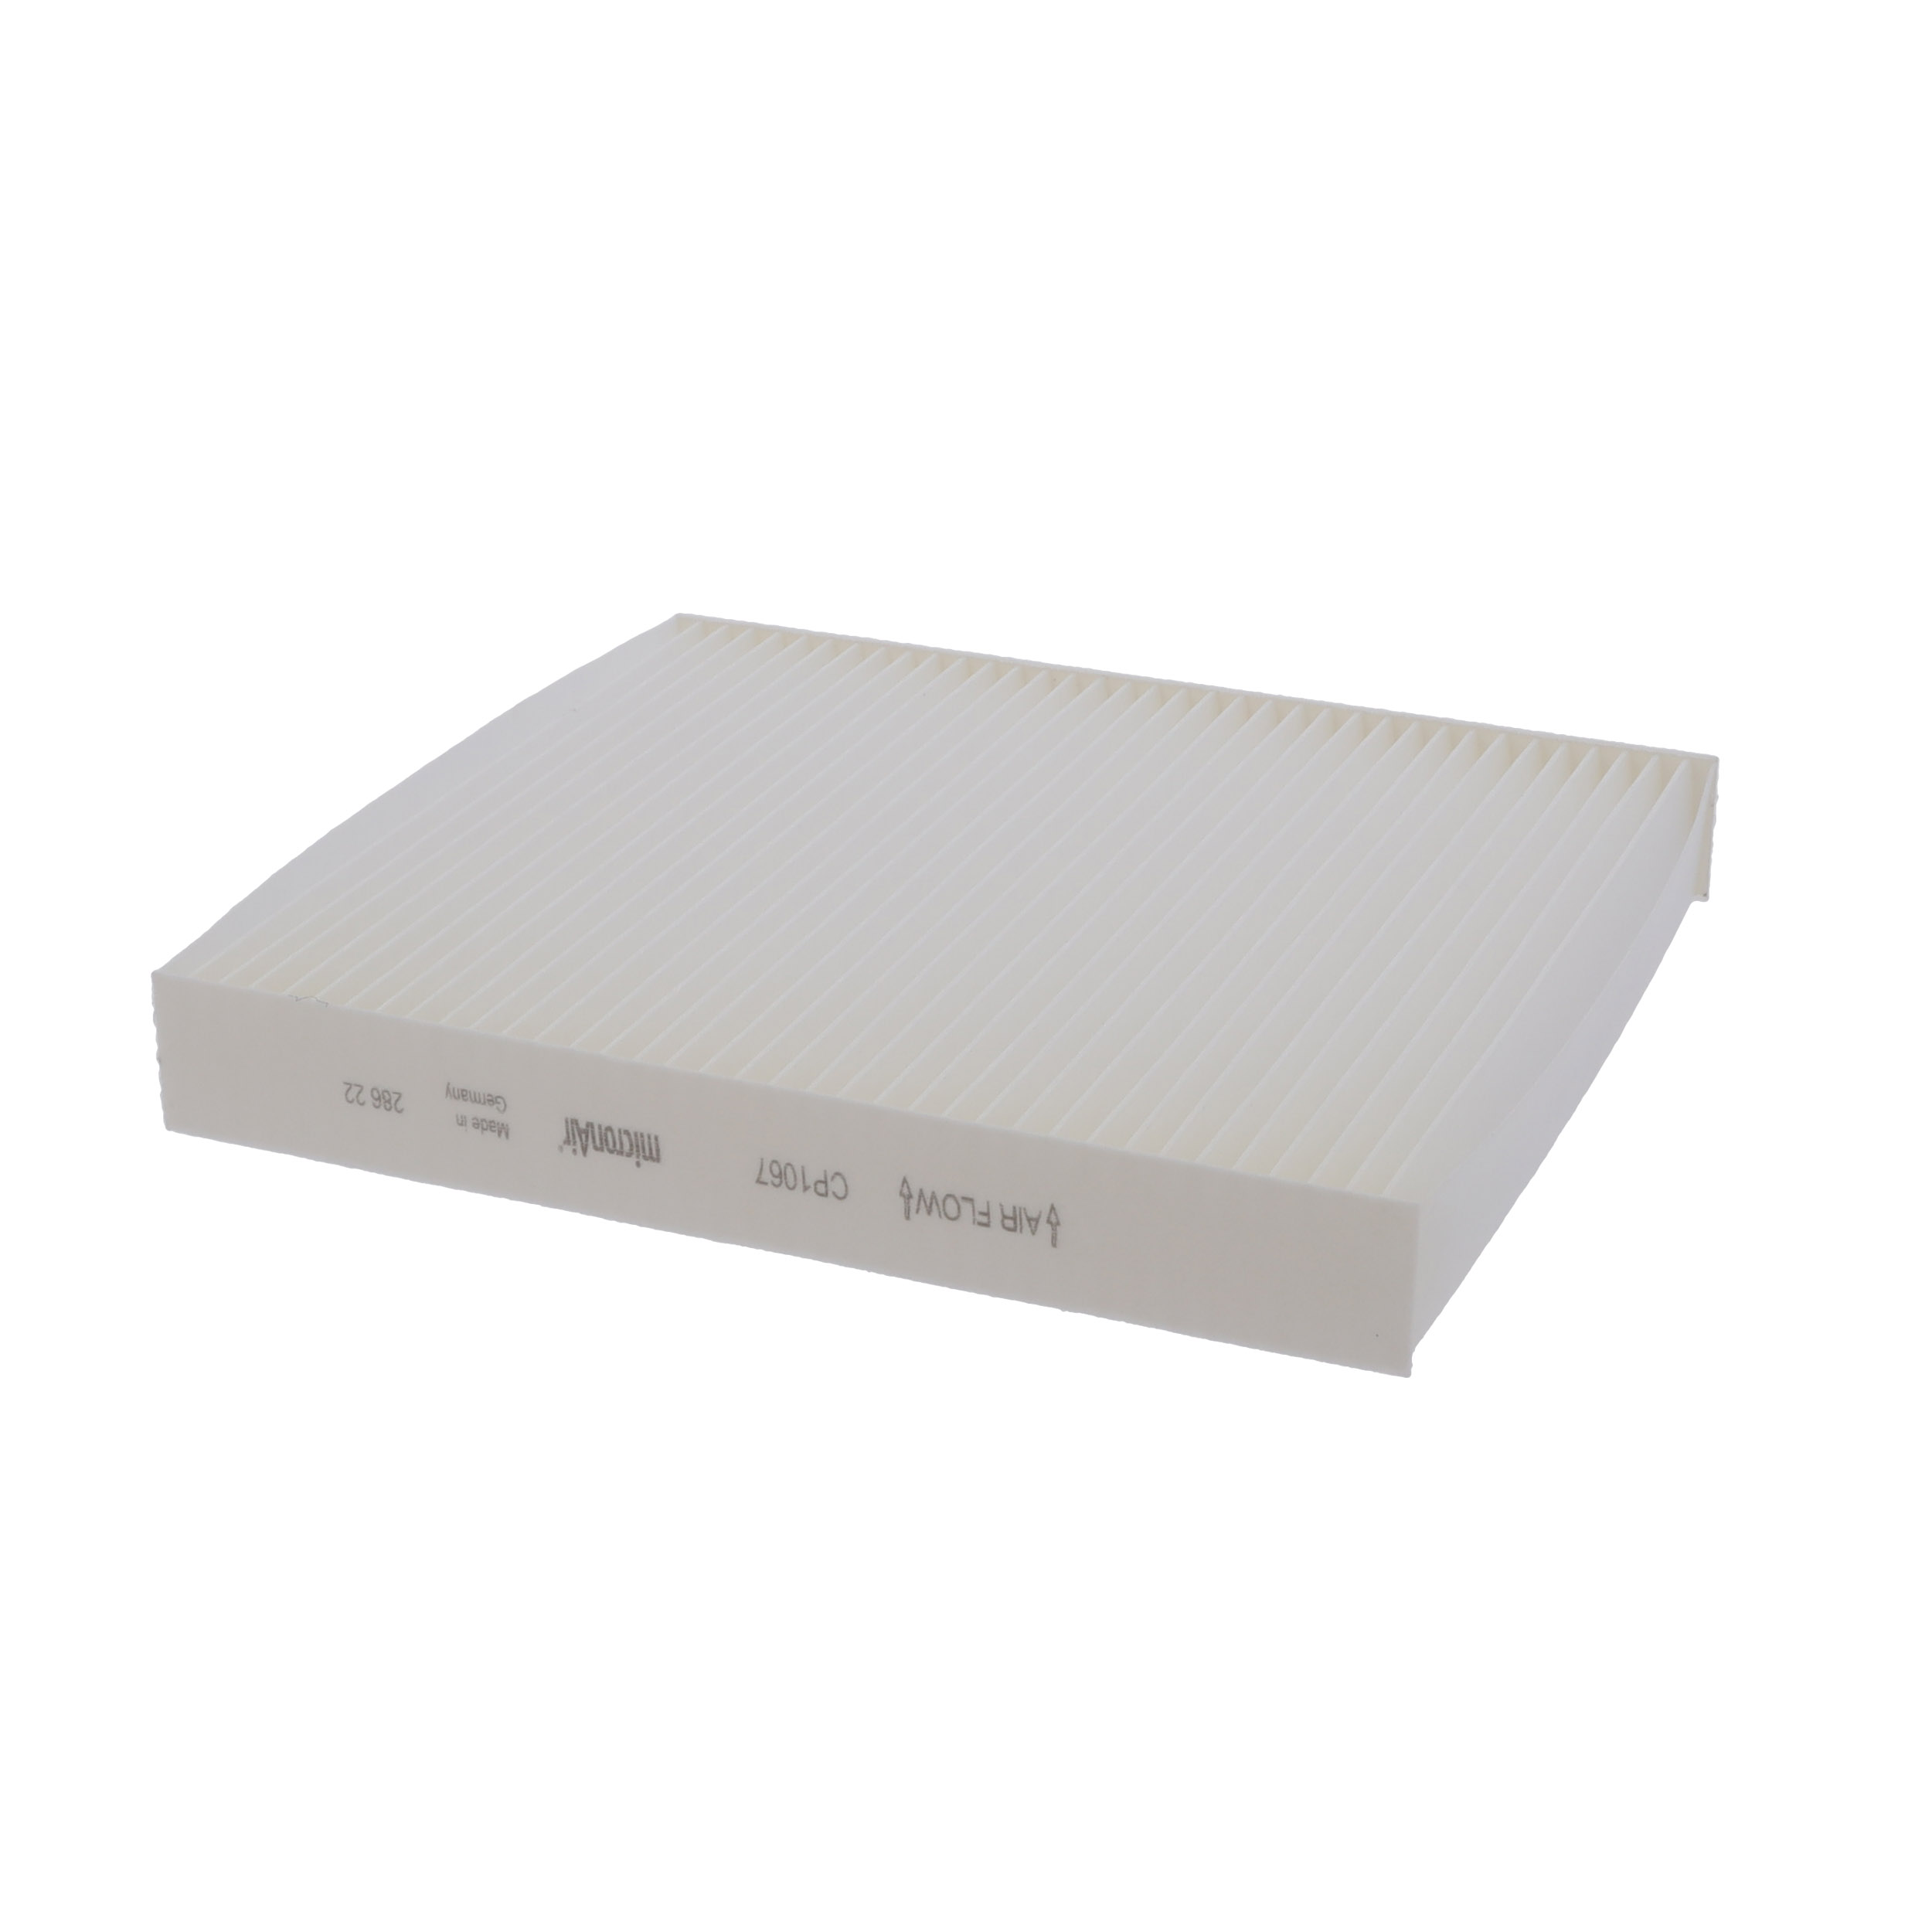 CORTECO Particulate Filter, 223 mm x 198 mm x 30 mm Width: 198mm, Height: 30mm, Length: 223mm Cabin filter 21652345 buy